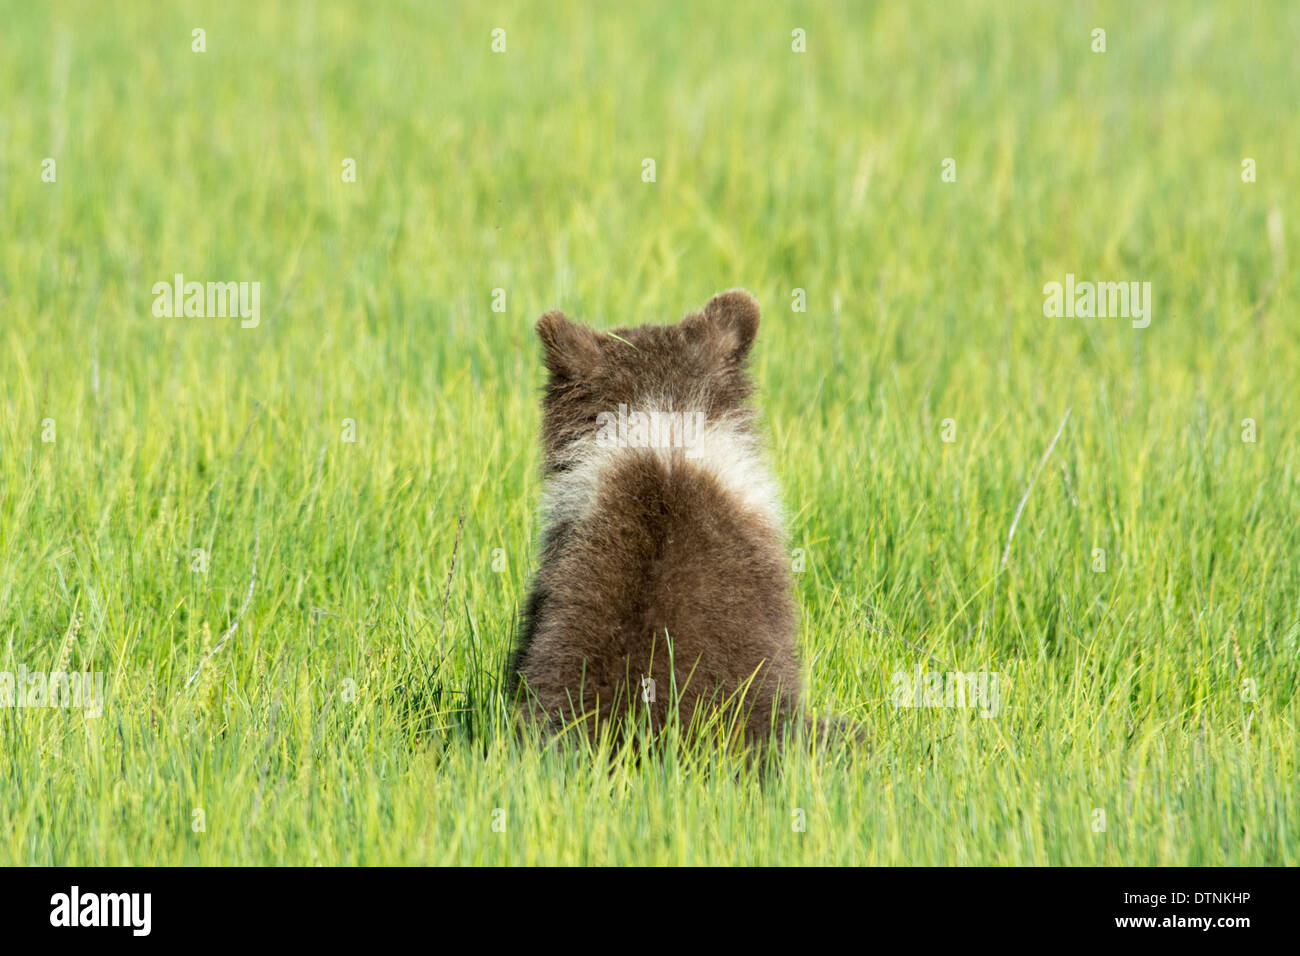 Rear View of a Grizzly Bear Cub, Ursus Arctos, showing a white collar around its neck, Lake Clark National Park, Alaska, USA Stock Photo